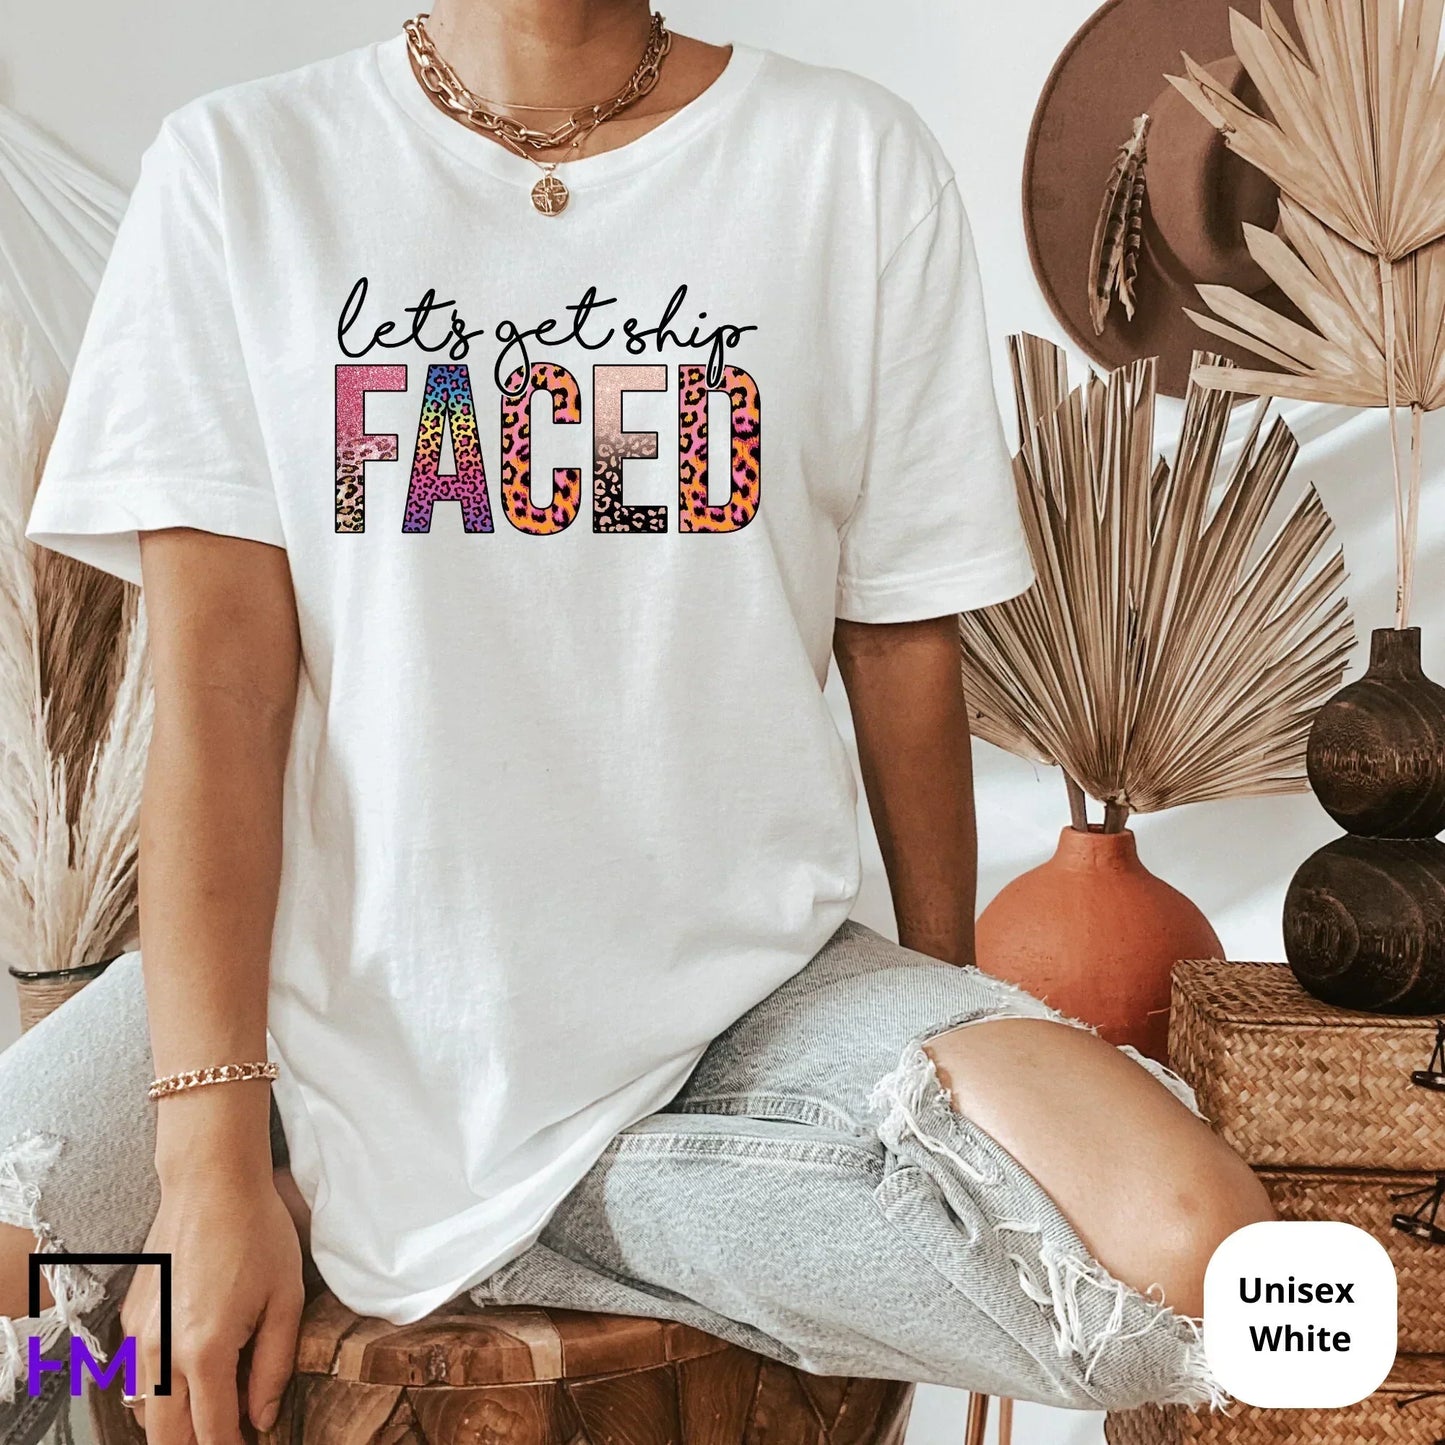 Let's Get Ship Faced, Funny Cruise Shirts for Women